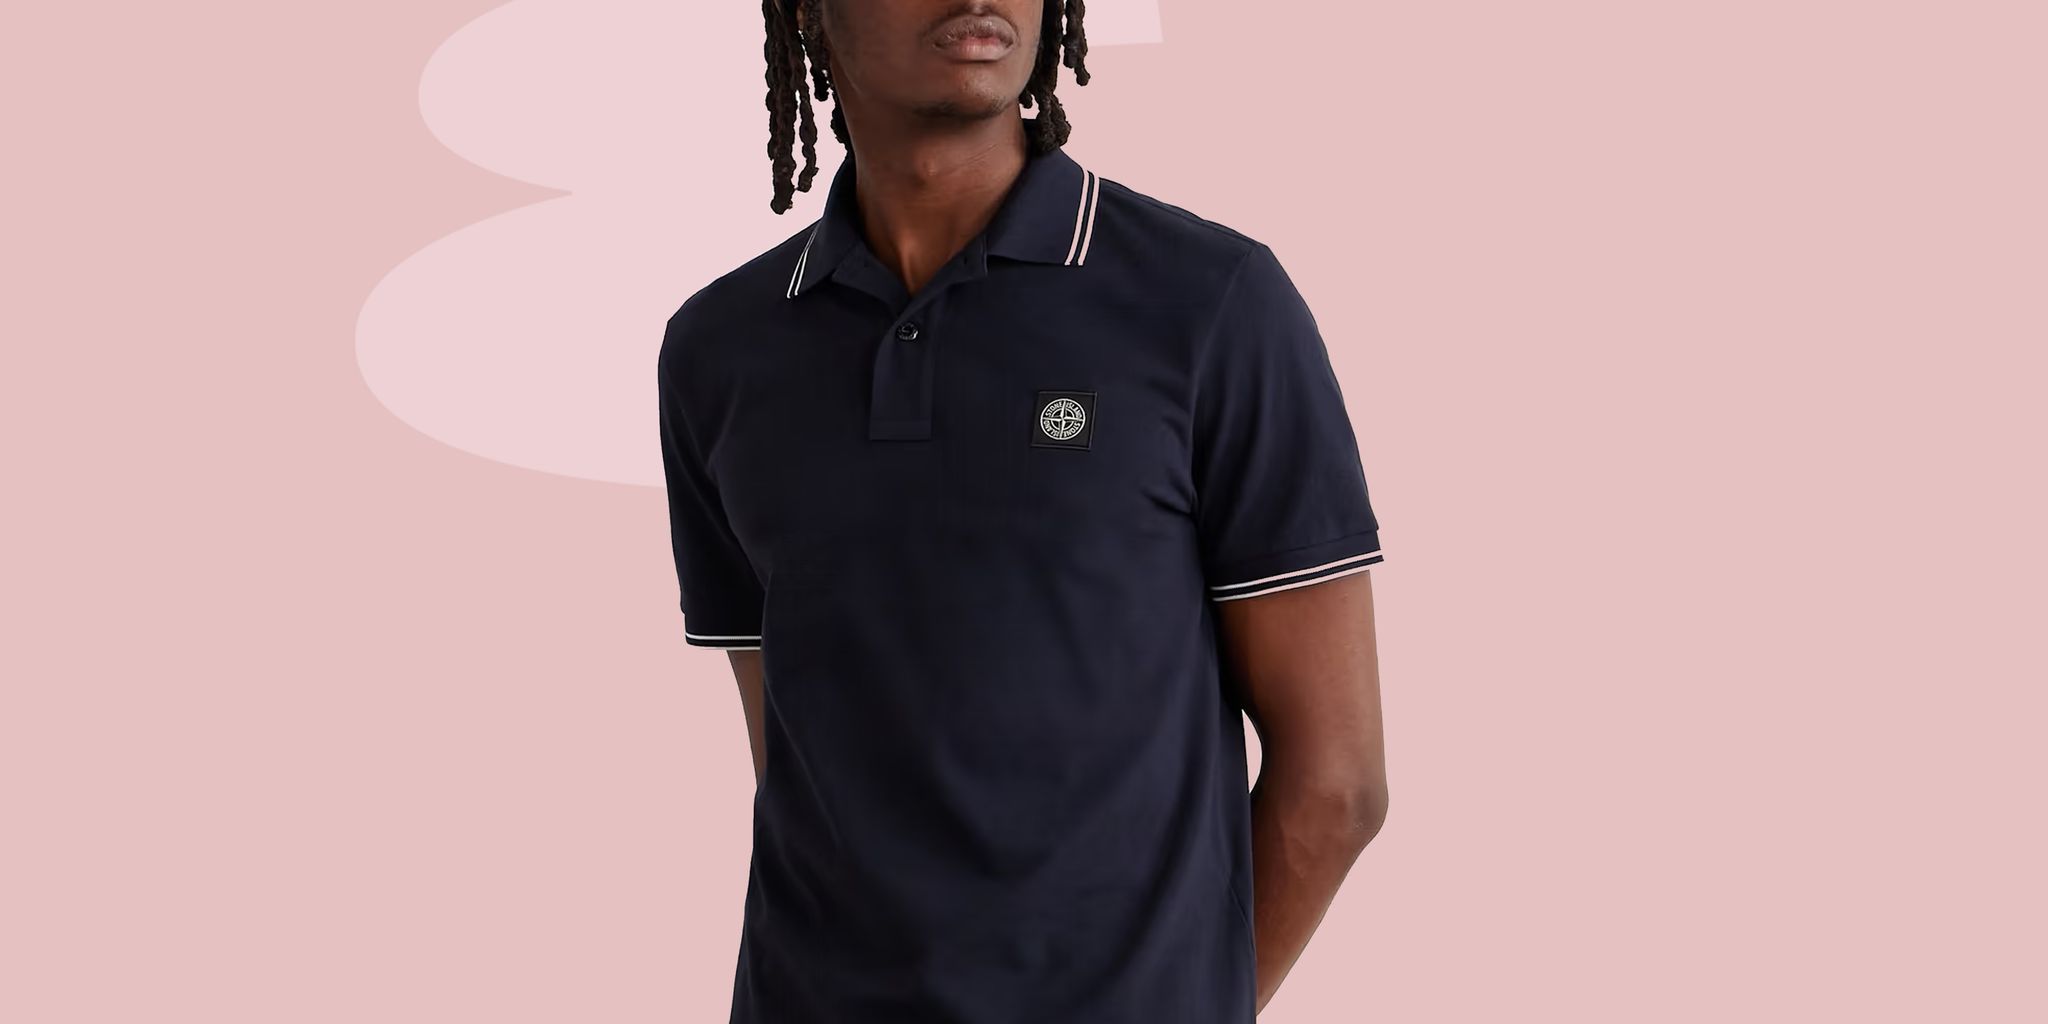 Buy Custom Embroidered Blue Polo Shirt at the Best Price